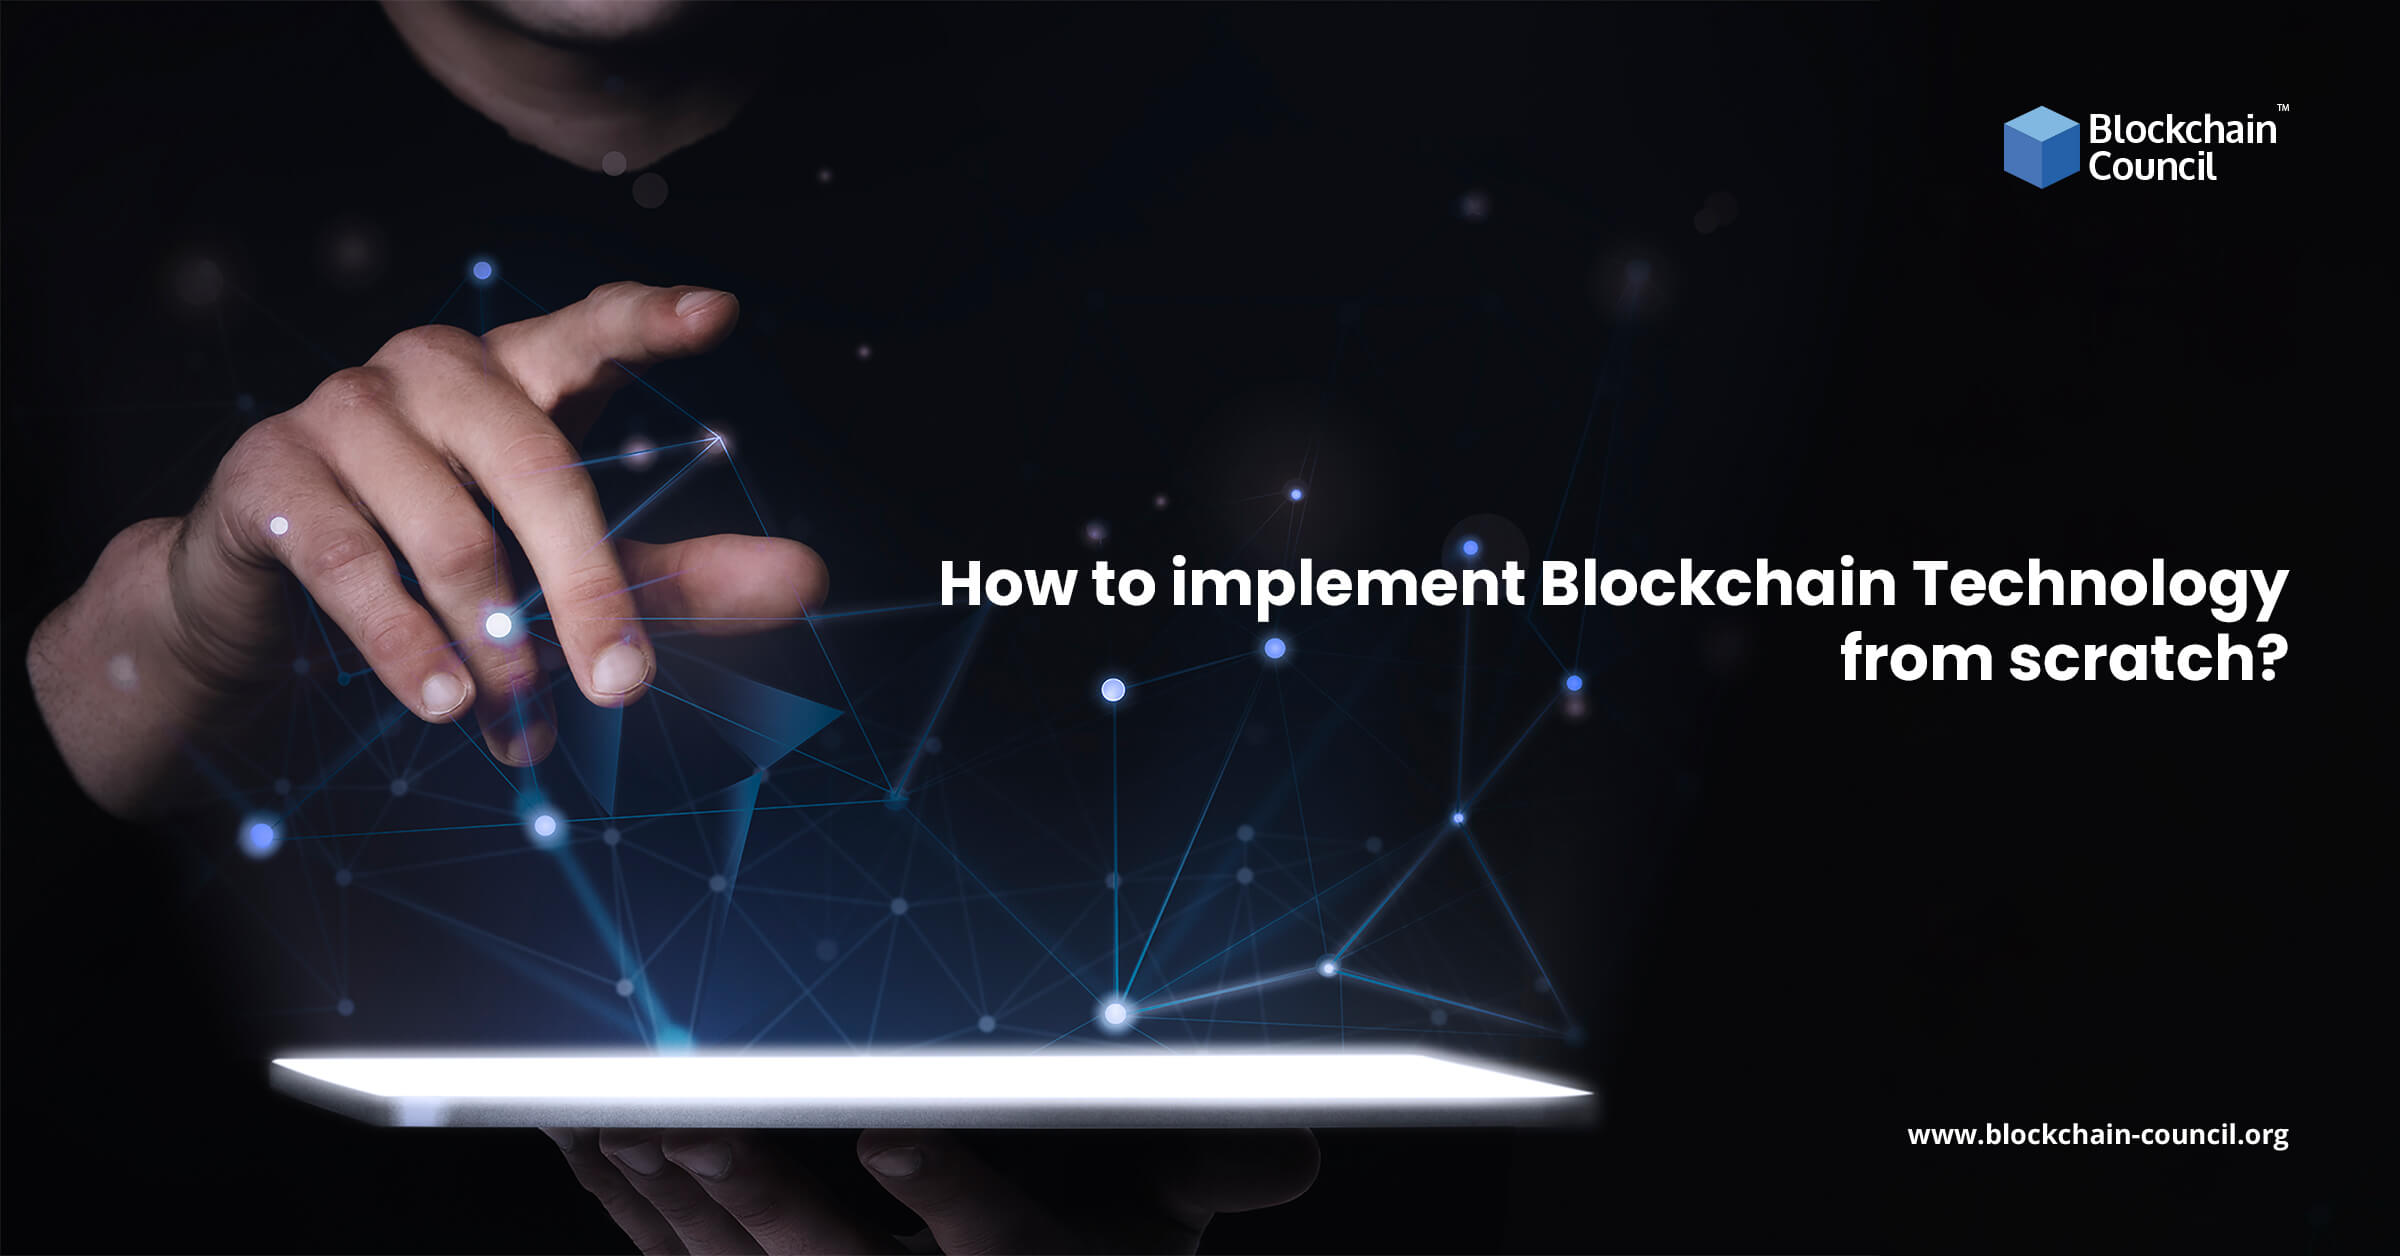 How to implement Blockchain Technology from scratch?